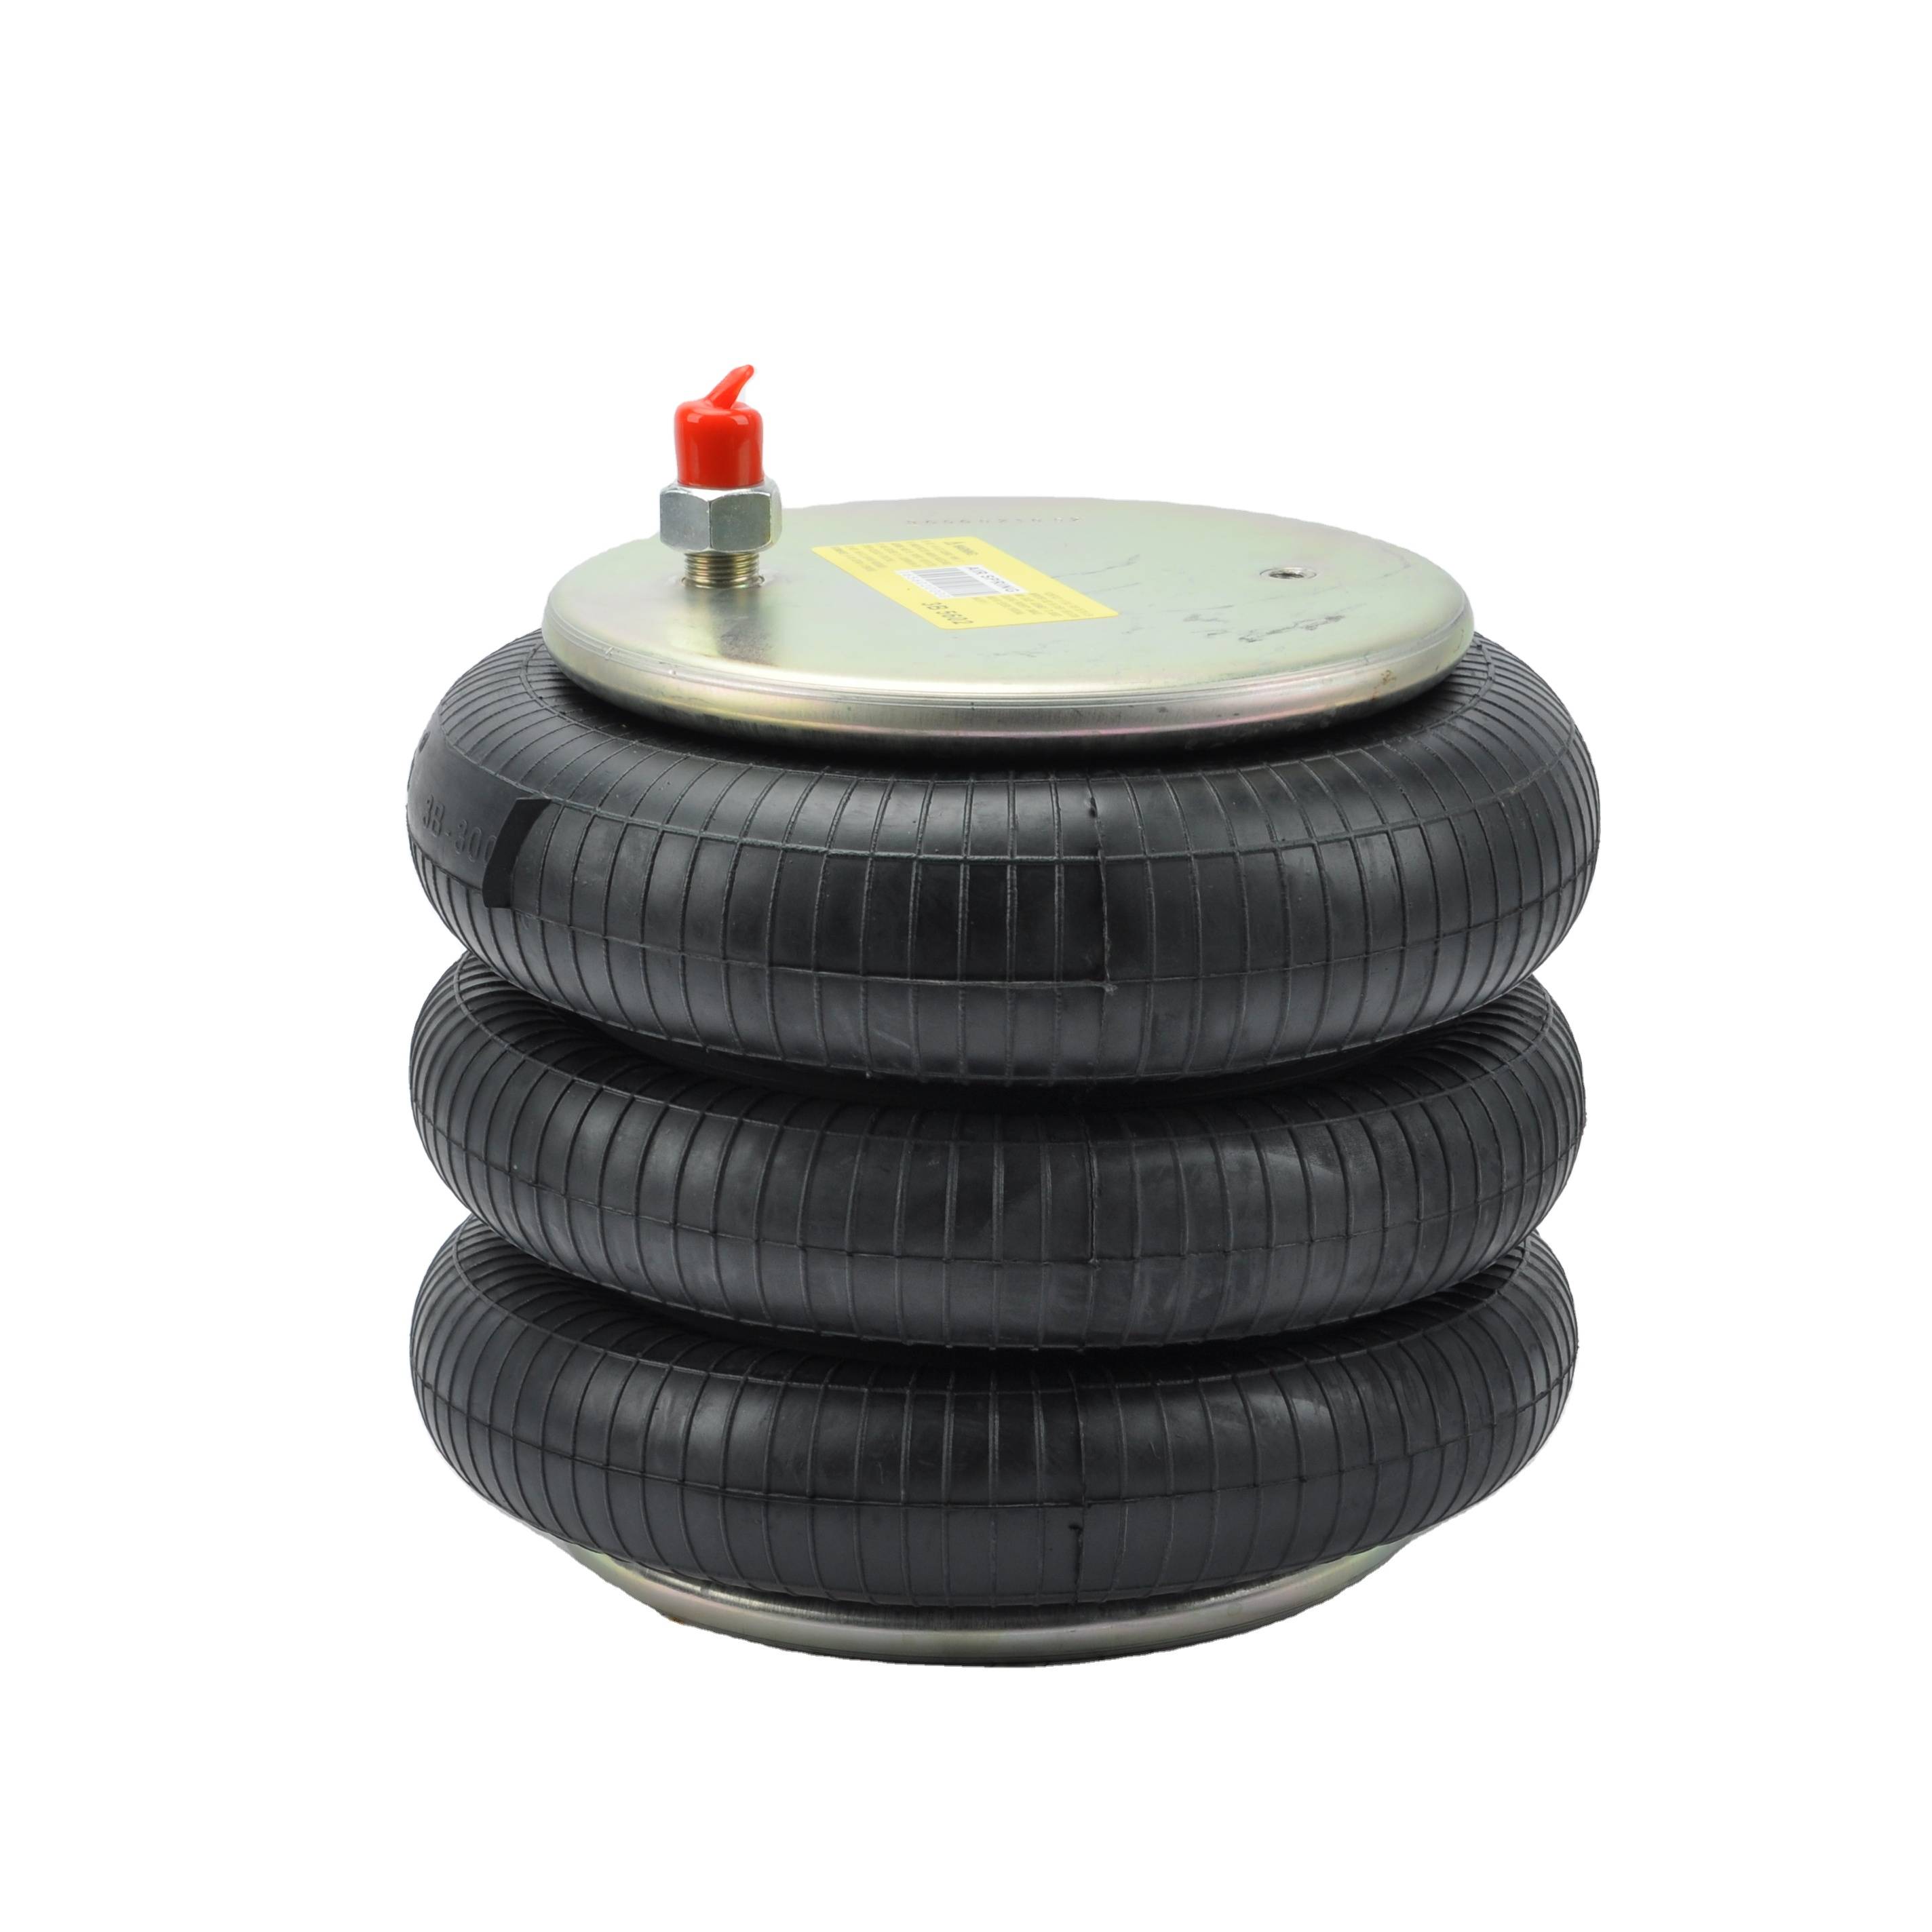 OUTLET KILANG TRIPLE CONVOLUTED AIR SPRING FIRESTONE W01-358-7994/CONTITECH FT330-29546/GOODYEAR 3B12-328